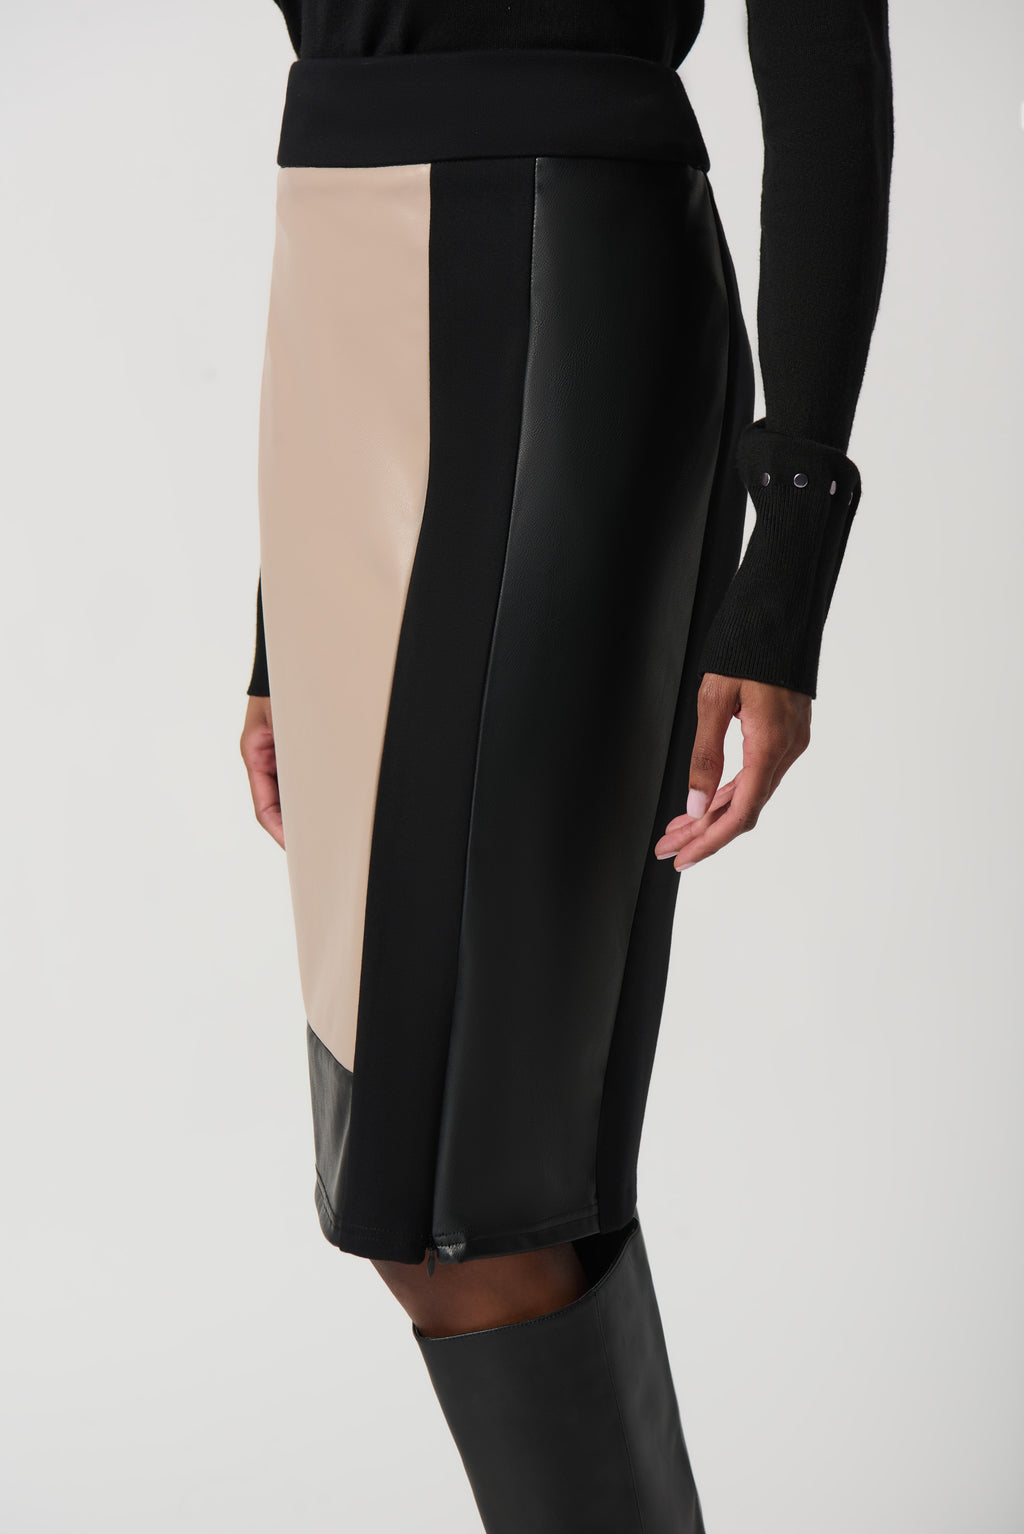 Joseph Ribkoff Black/Latte Heavy Knit And Faux Leather Pencil Skirt Style 234164